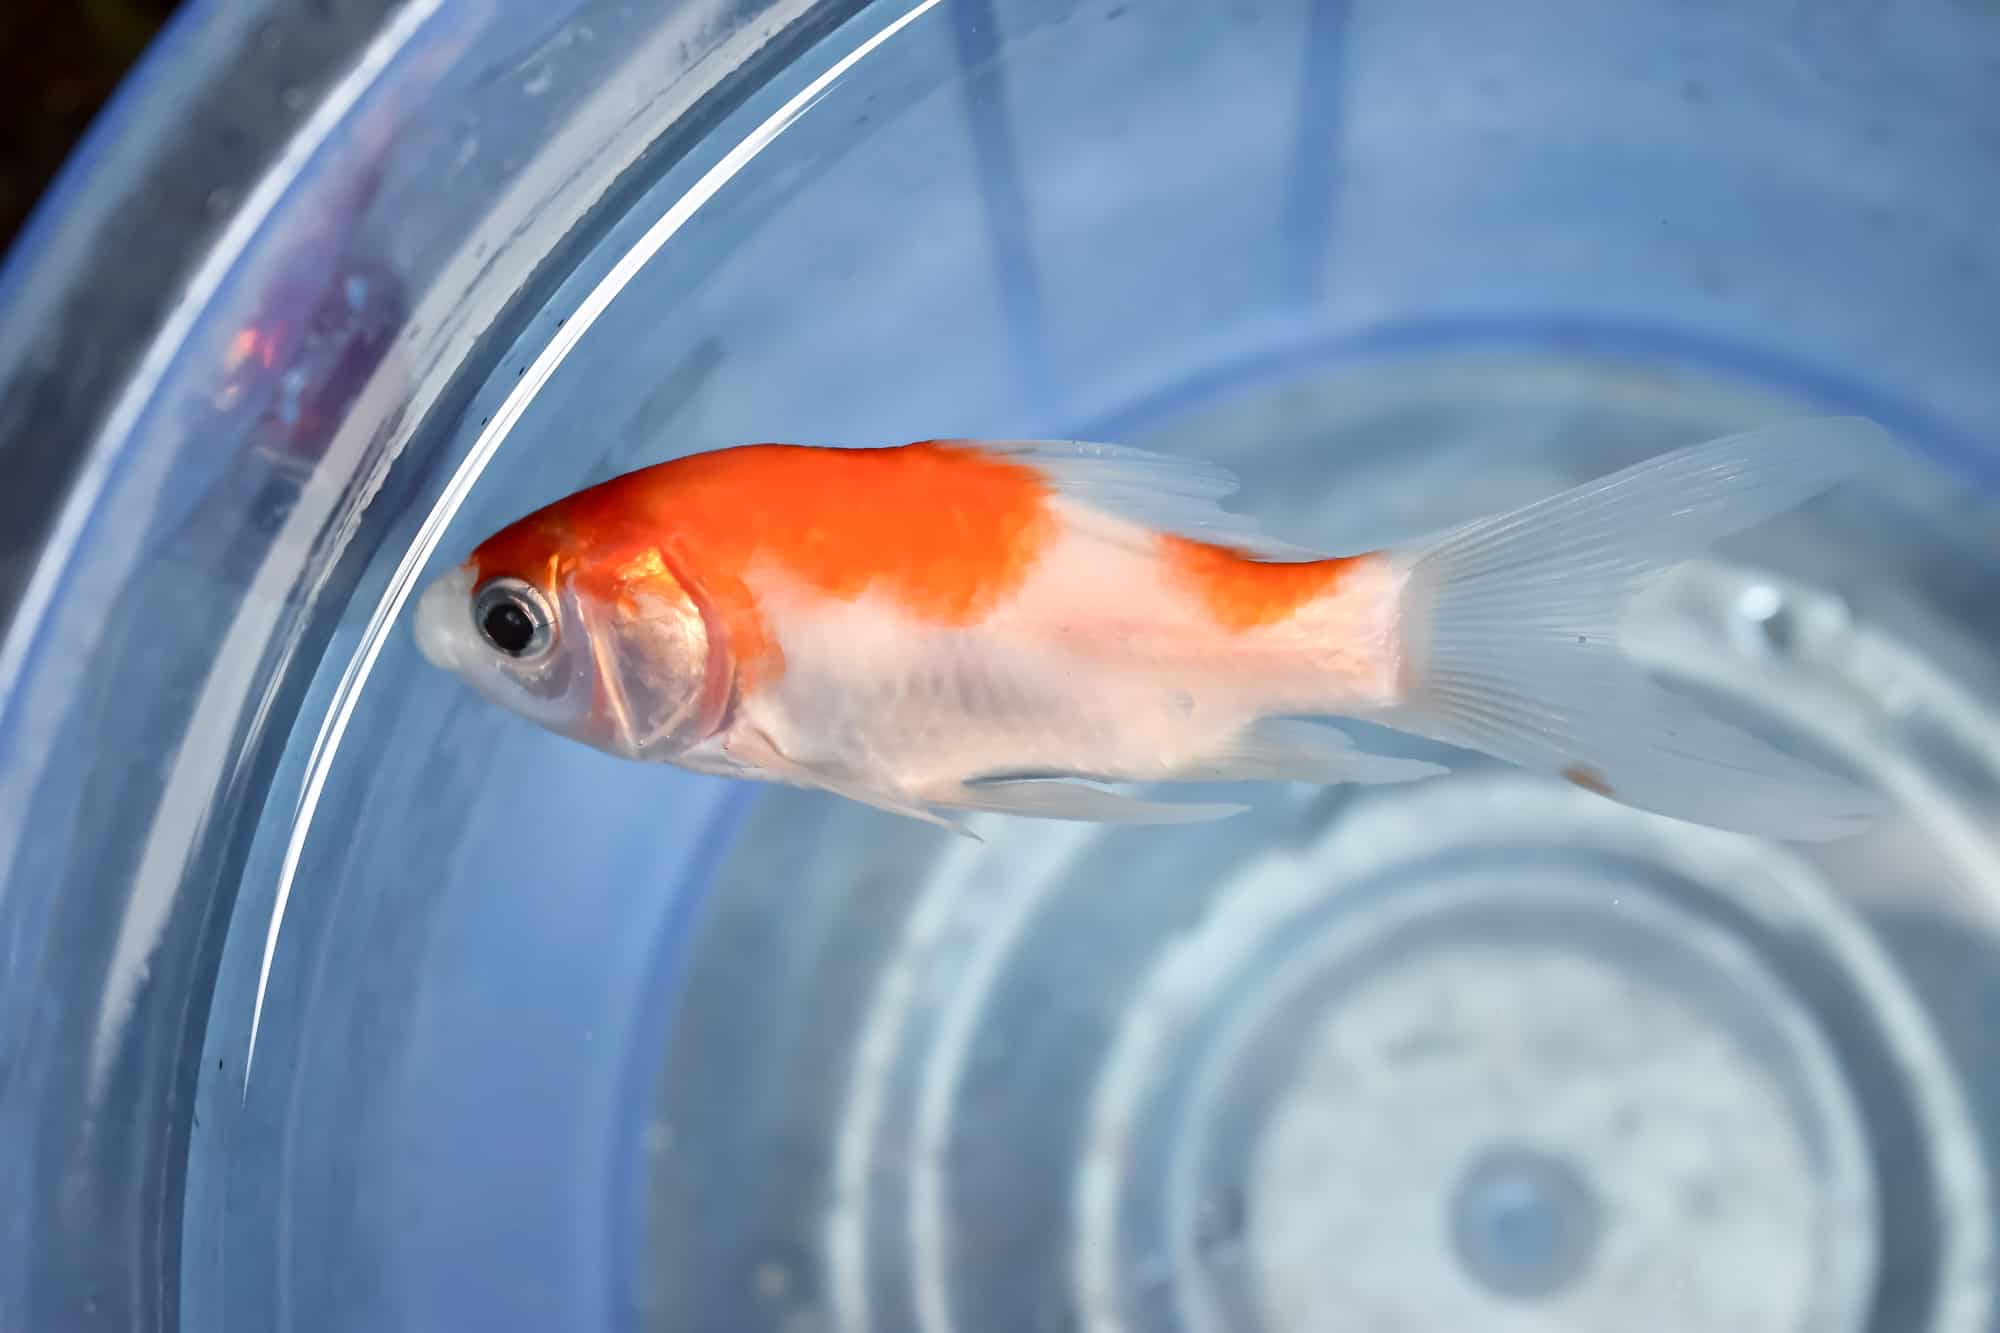 Signs of Stress in Fish